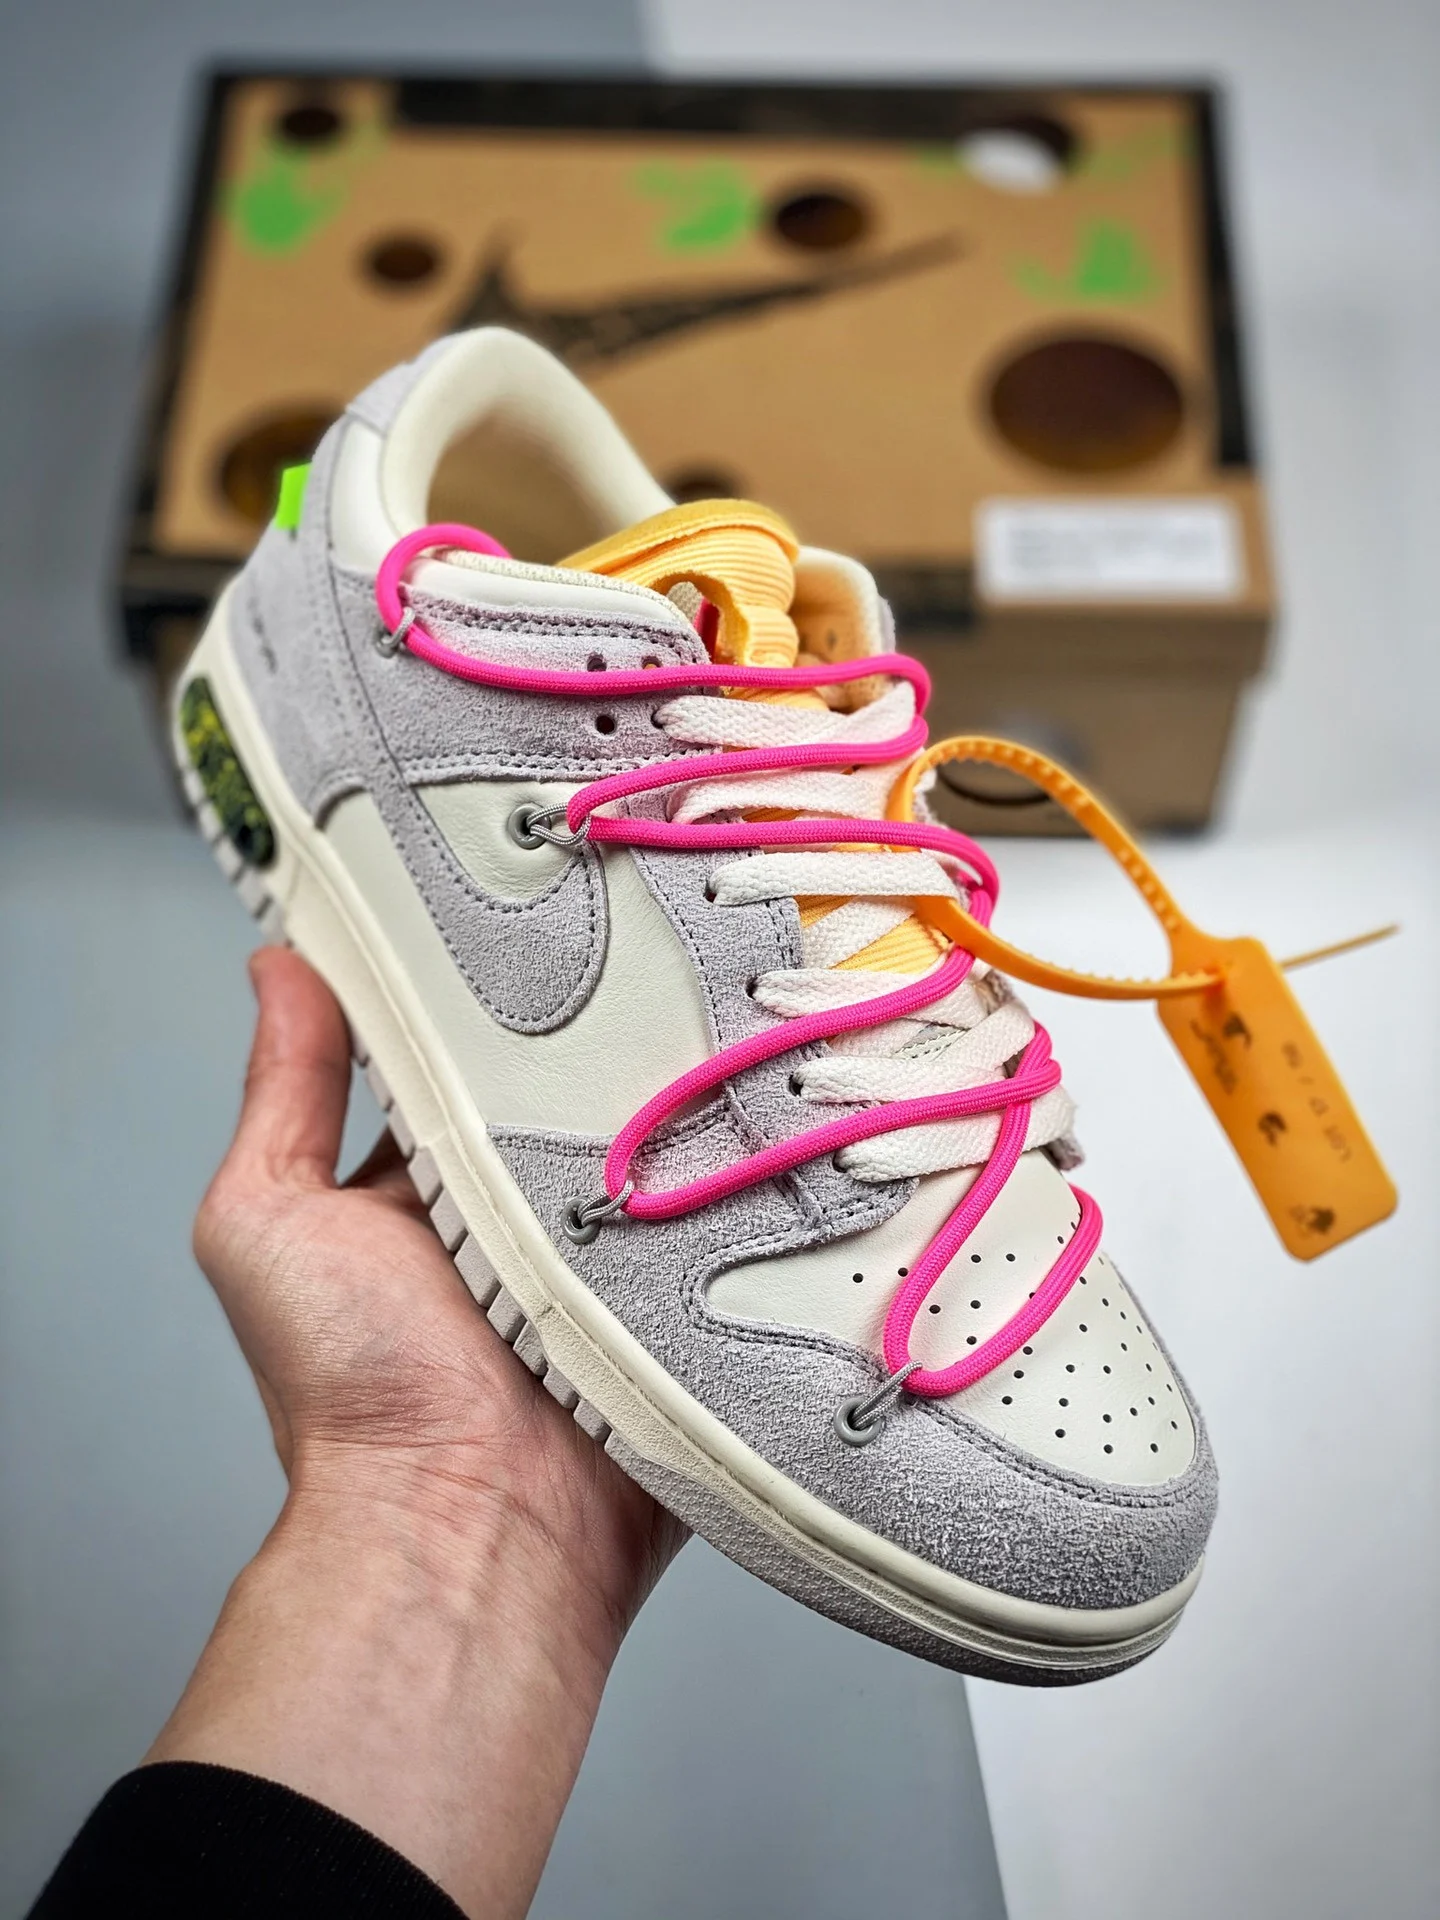 Off-White x Nike Dunk Low 17 of 50 Sail Neutral Grey Hyper Pink For Sale